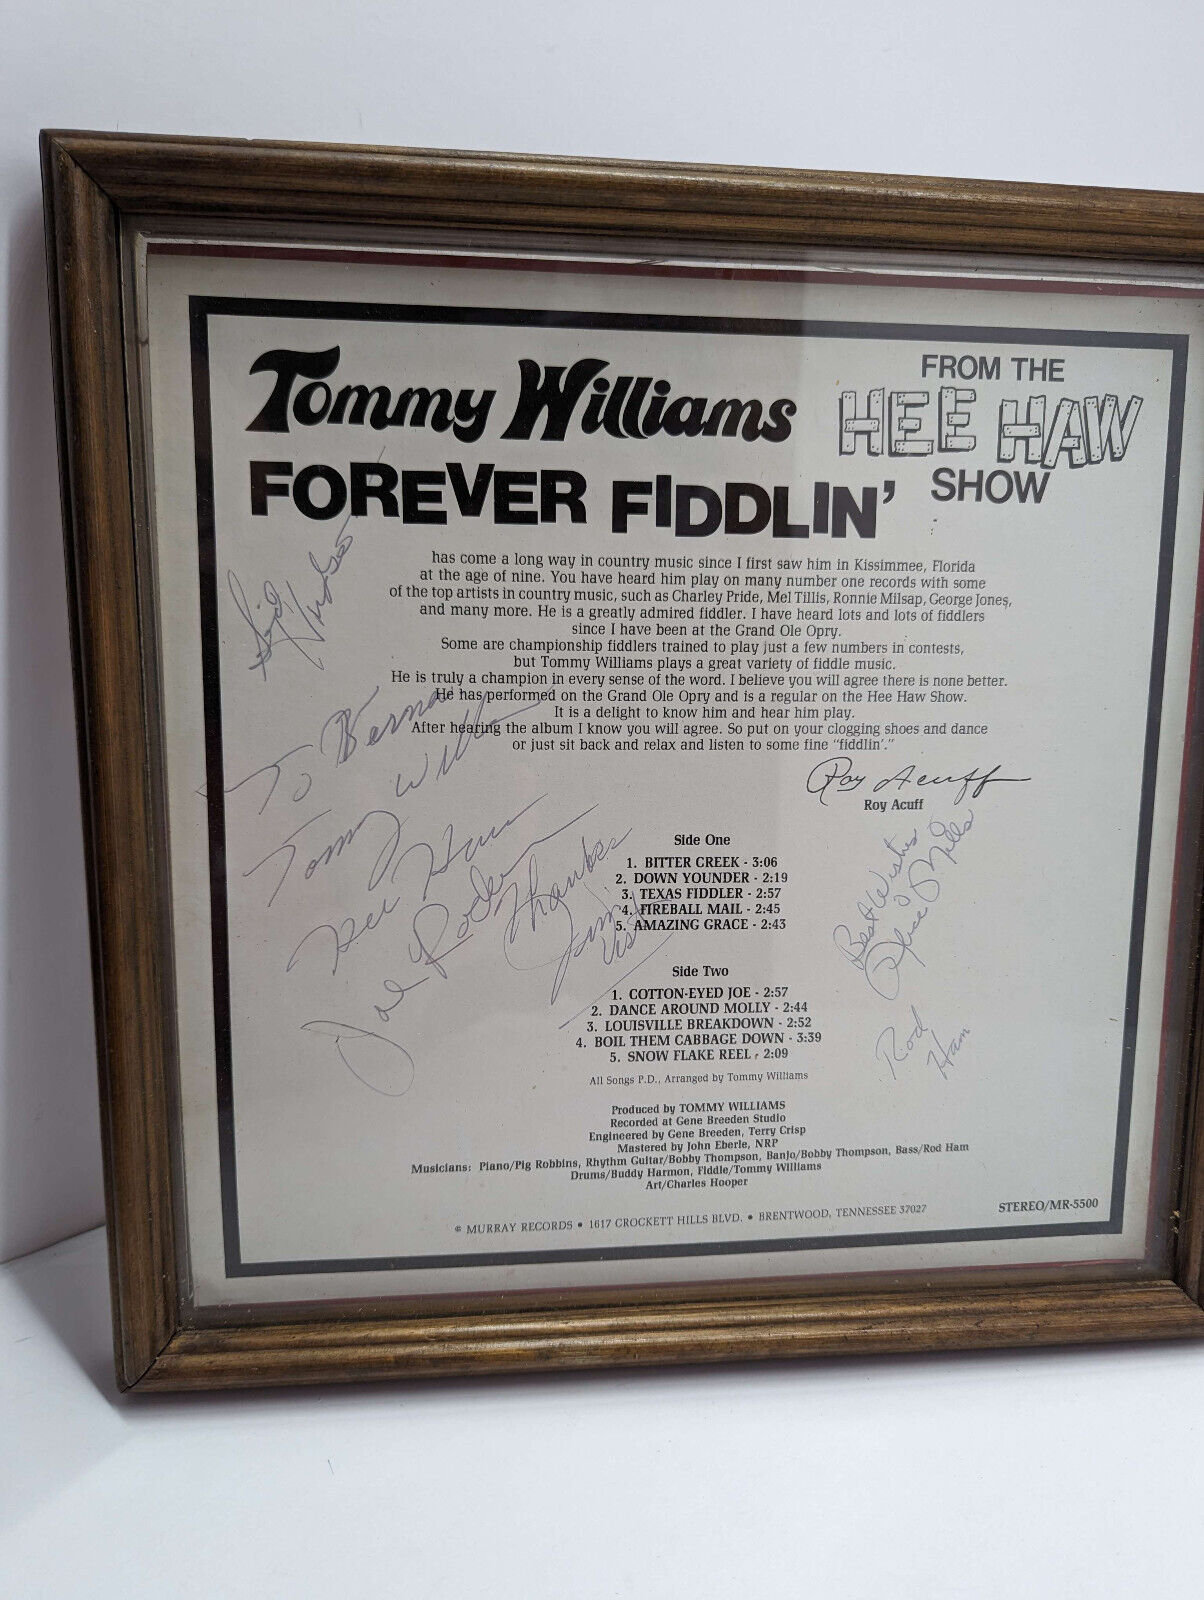 TOMMY WILLIAMS from the Hee Haw TV Show FOREVER FIDDLIN\' vinyl LP SIGNED